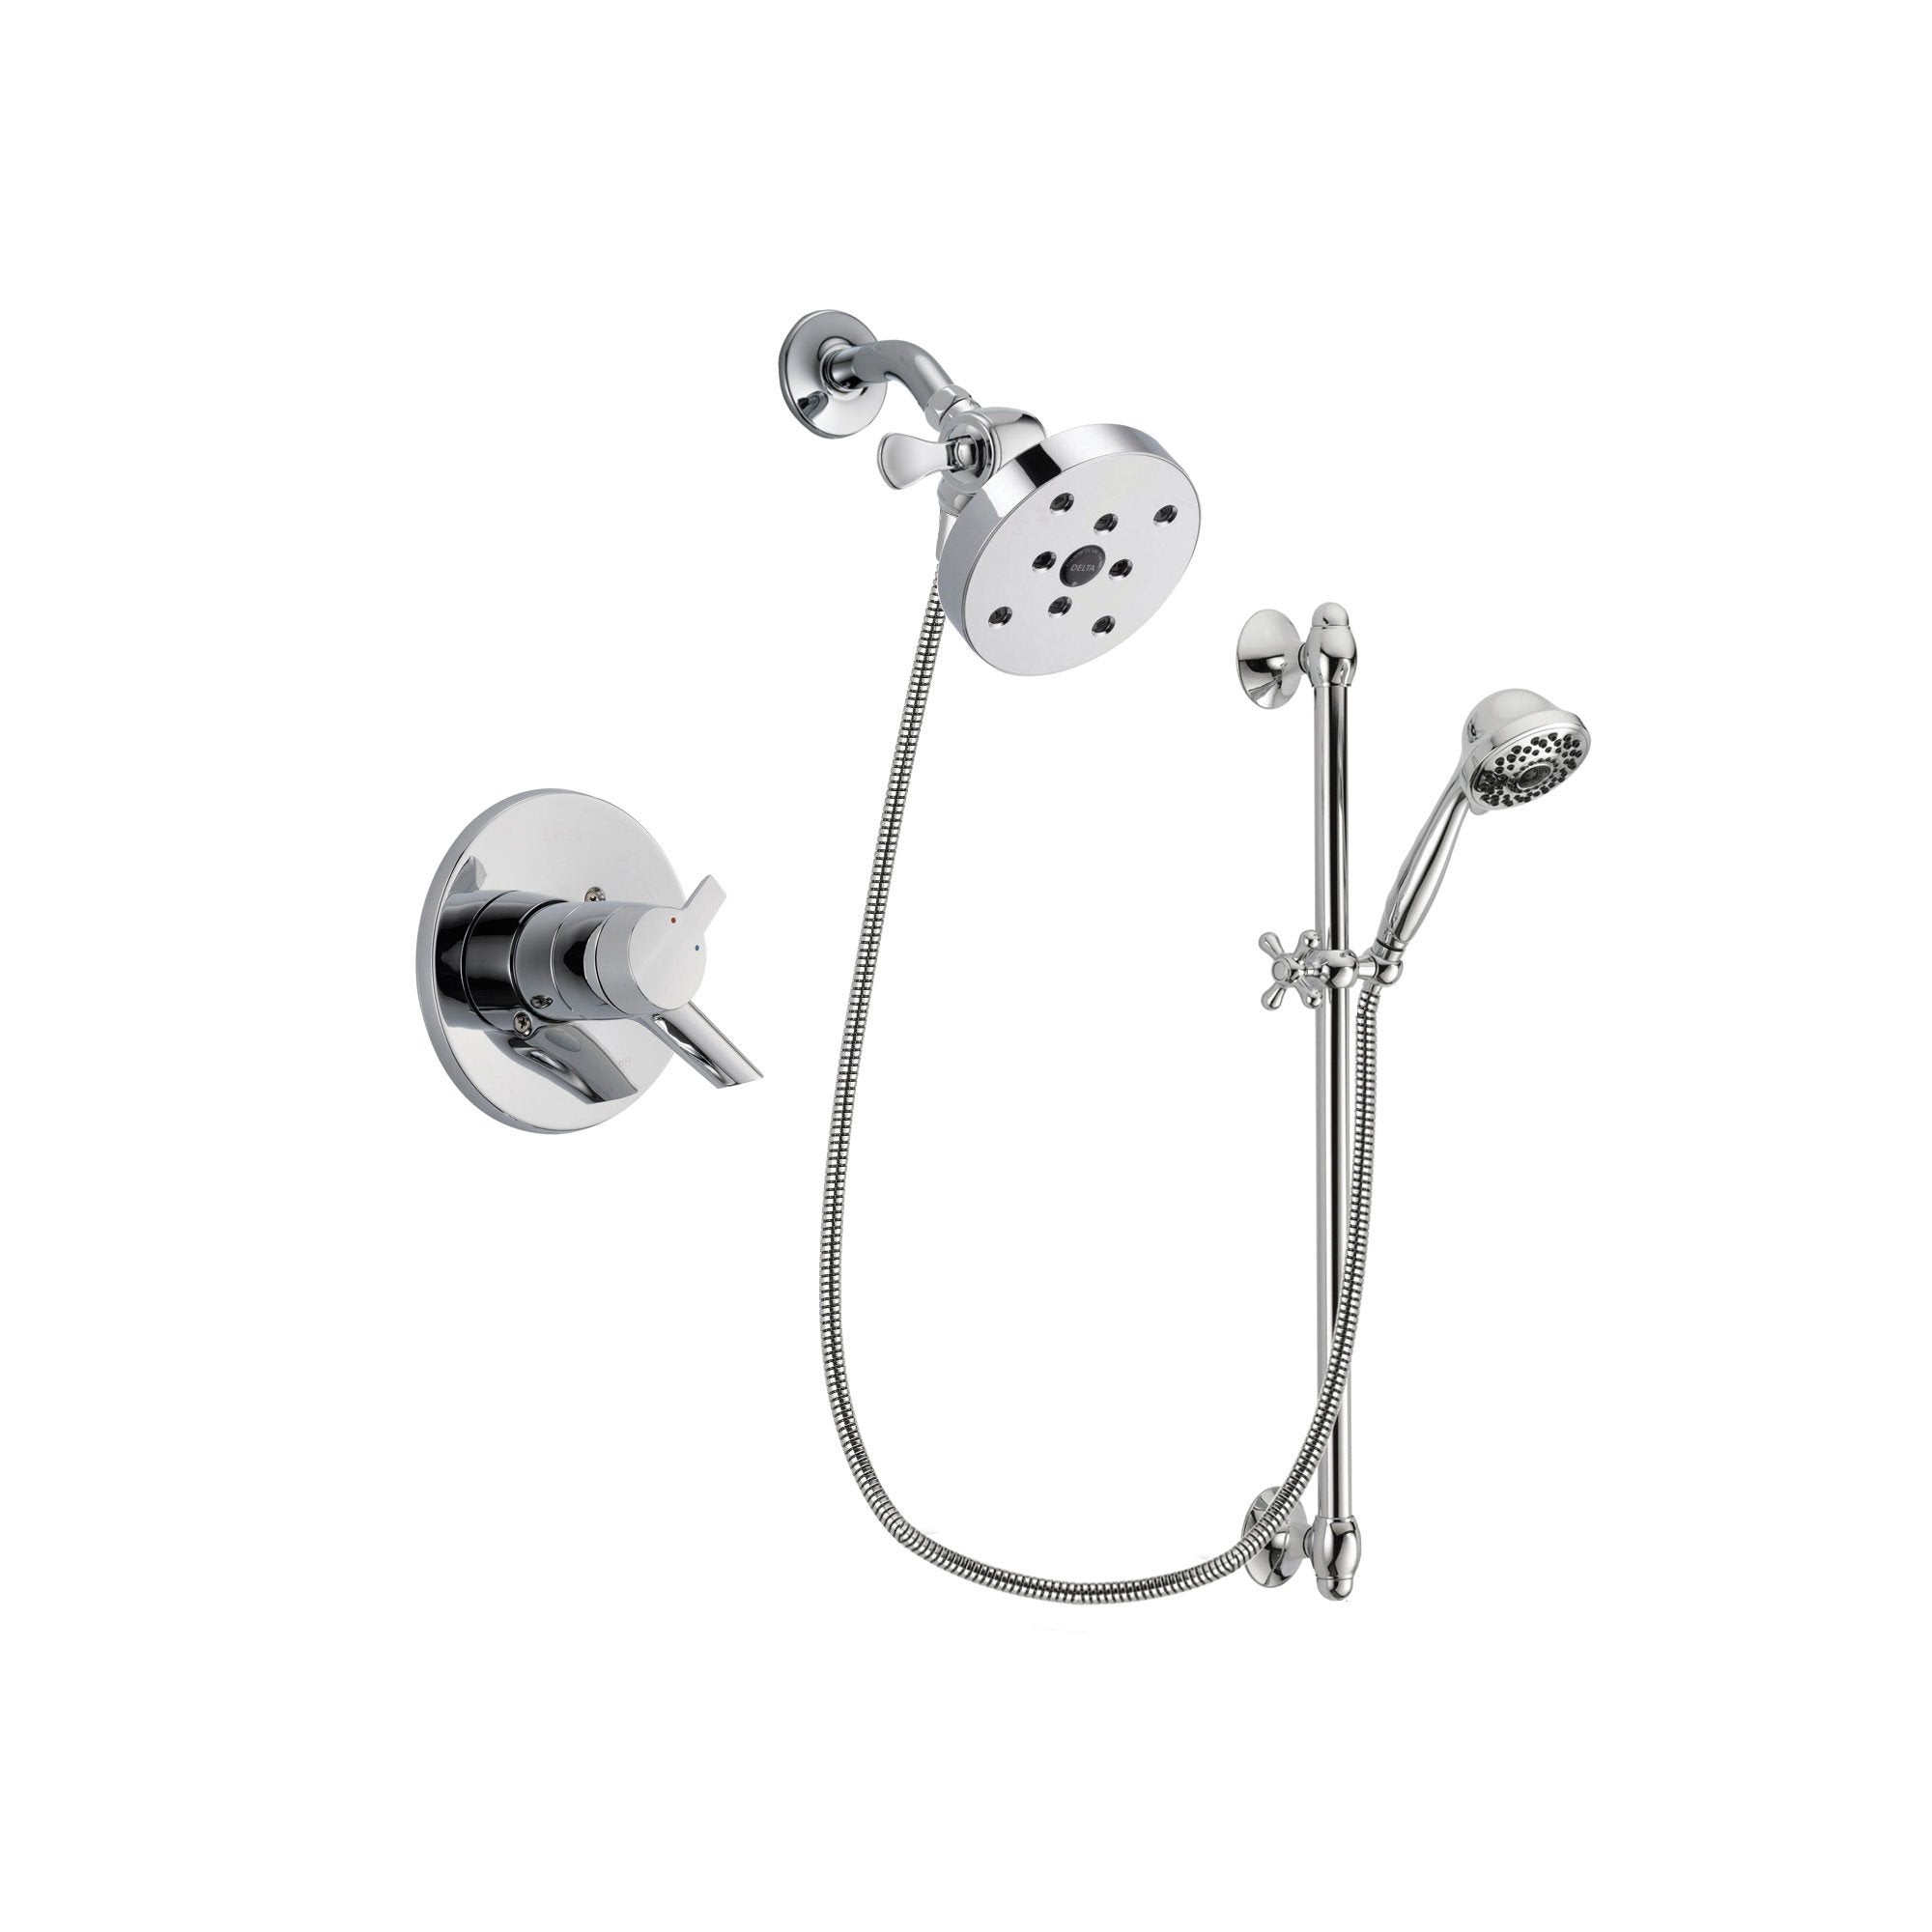 Delta Compel Chrome Shower Faucet System w/ Shower Head and Hand Shower DSP0688V